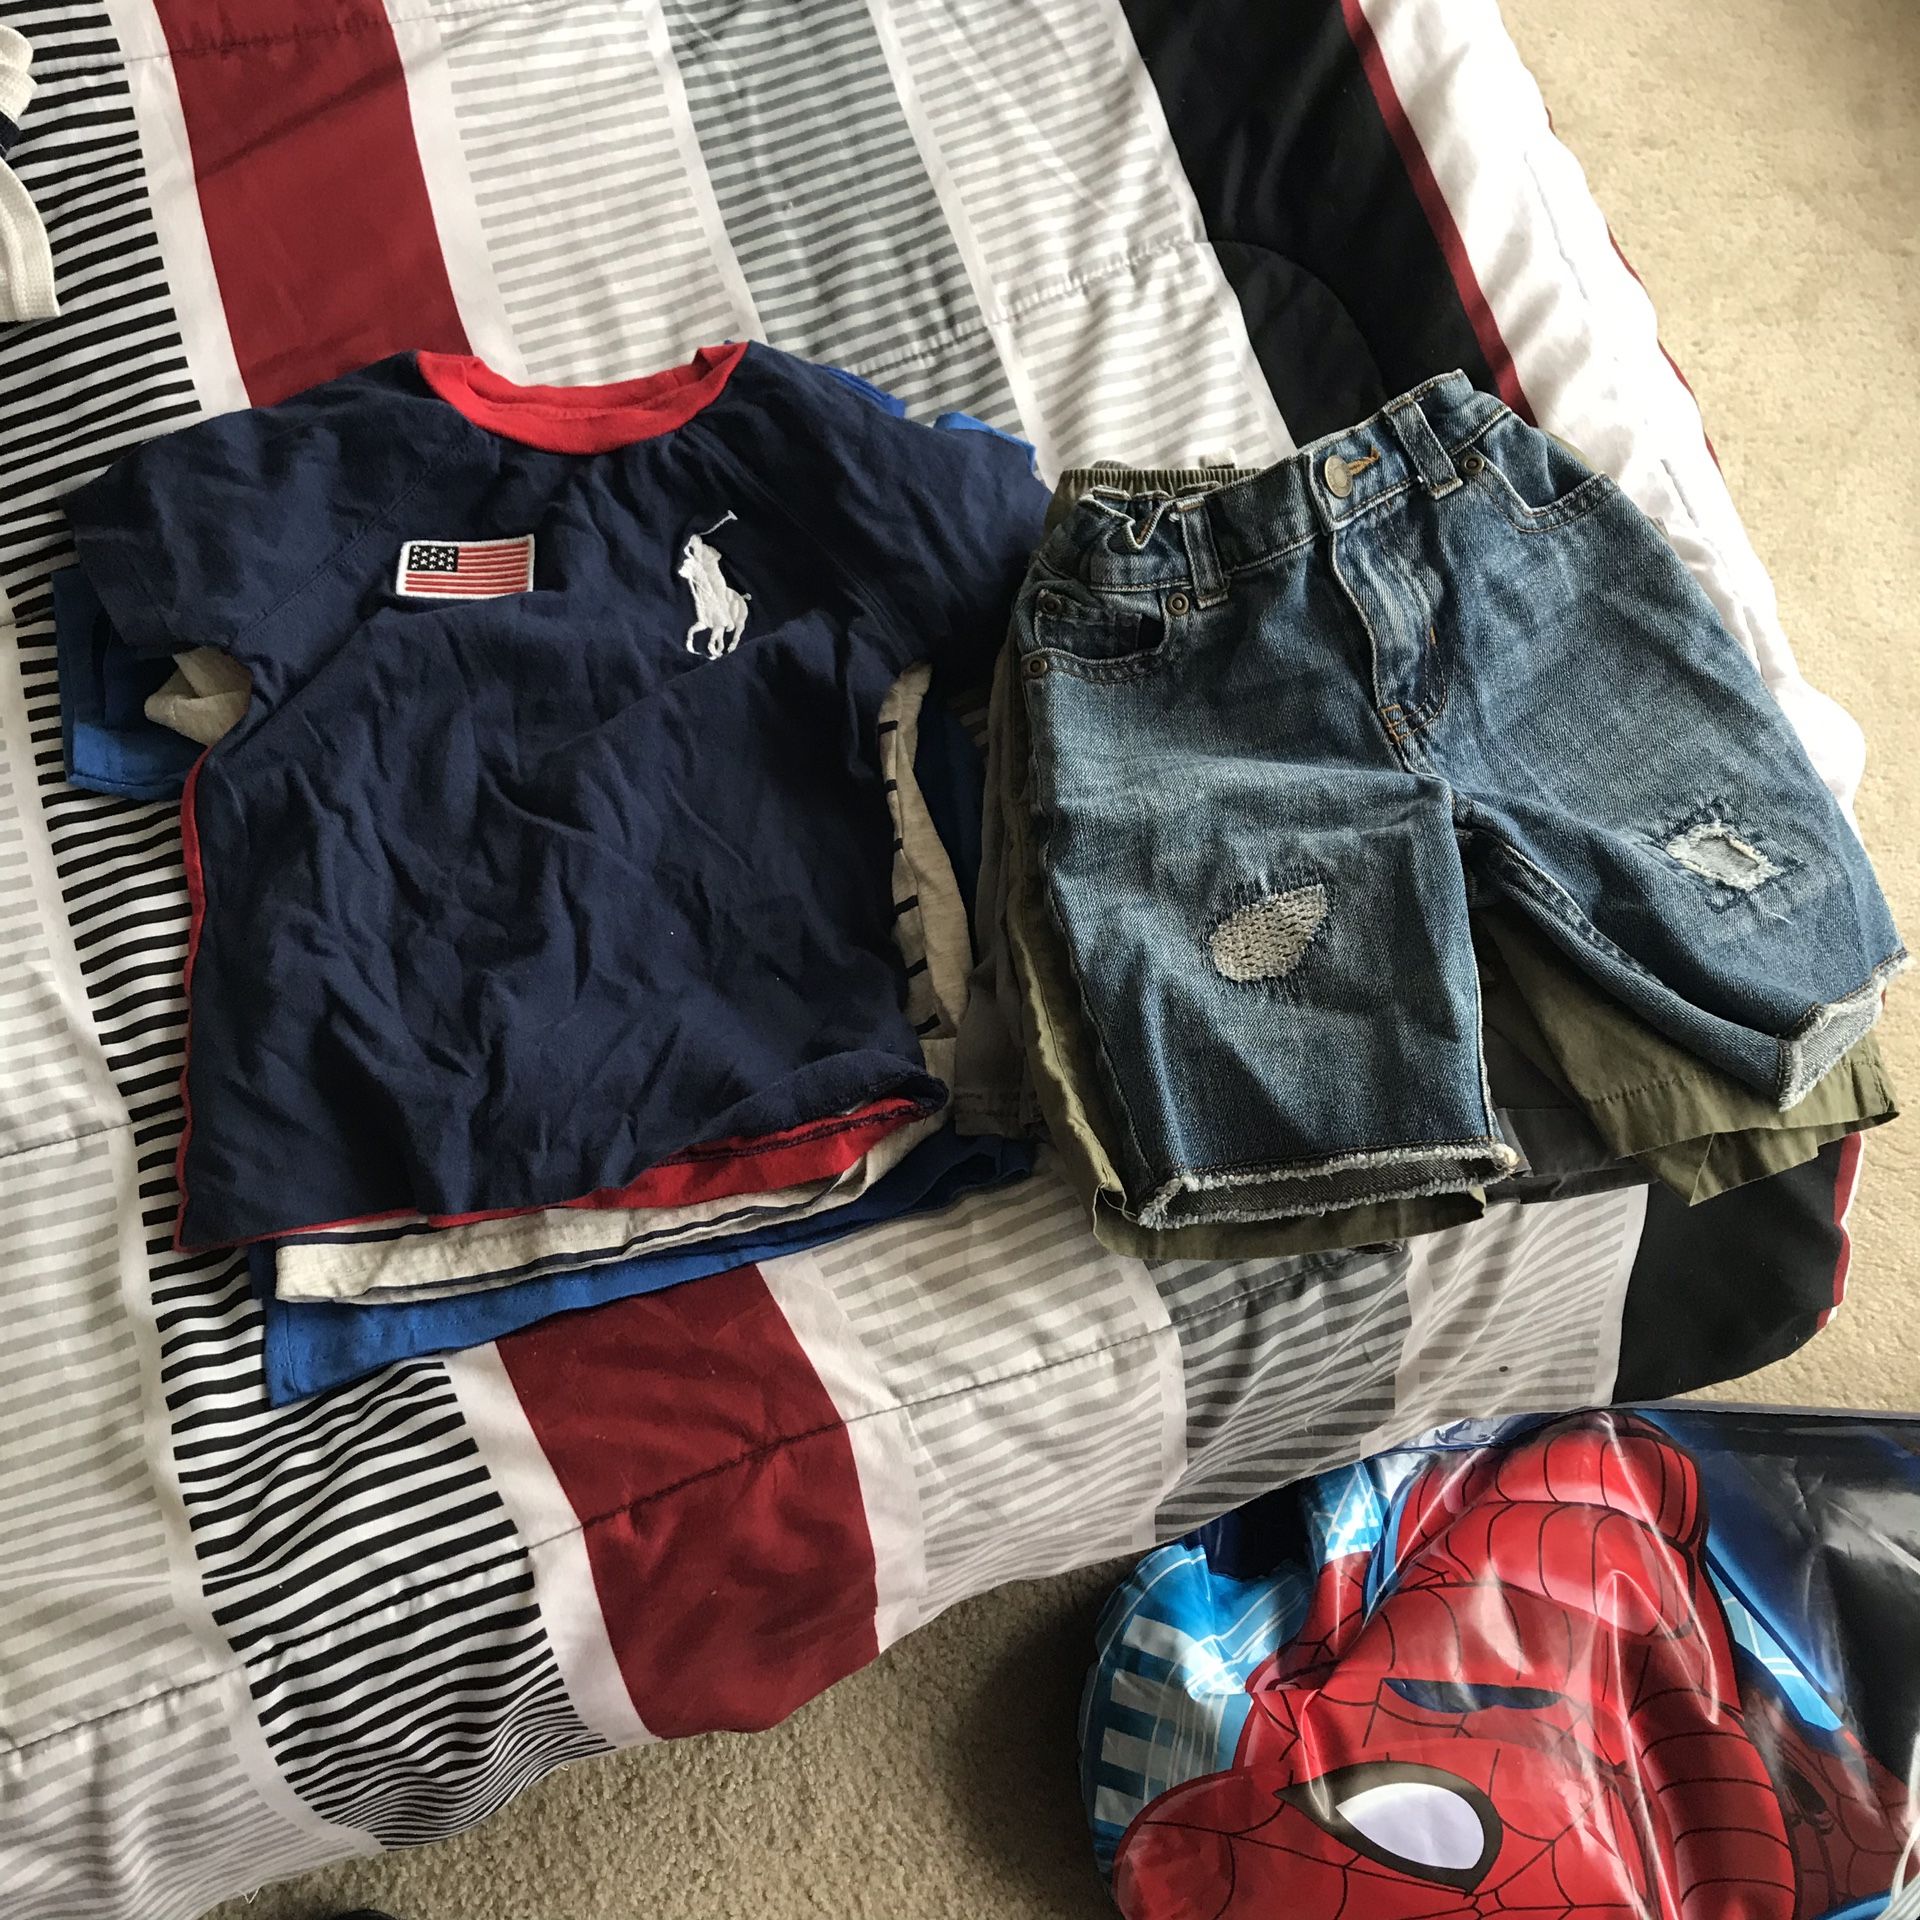 Toddler 3T clothes